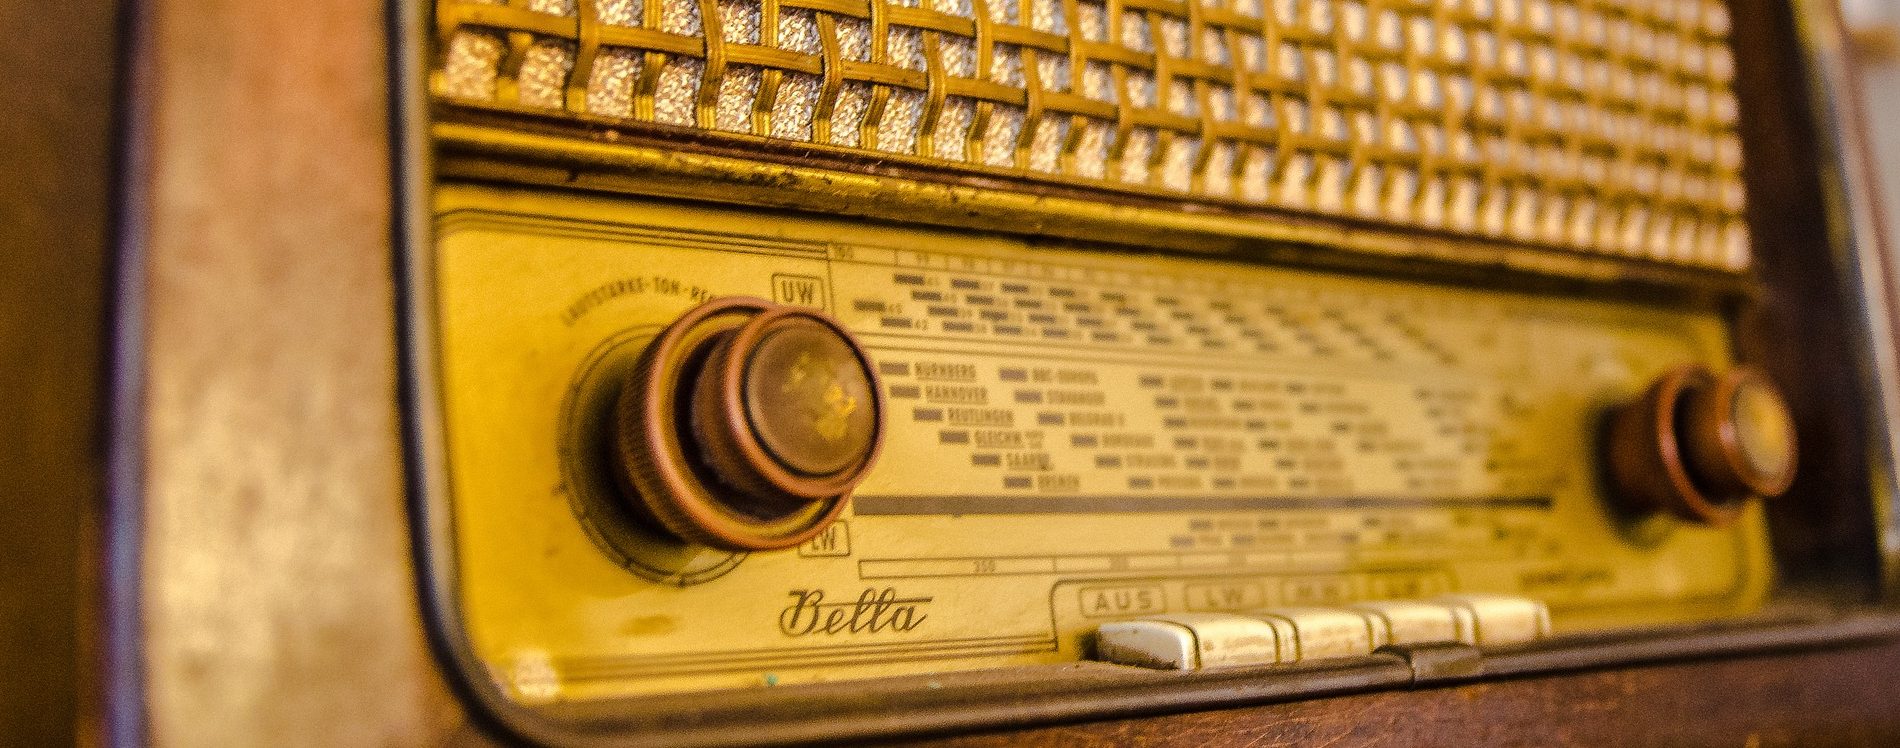 Pixabay - Free Clip Art - Use For Podcasts - Antique Radio